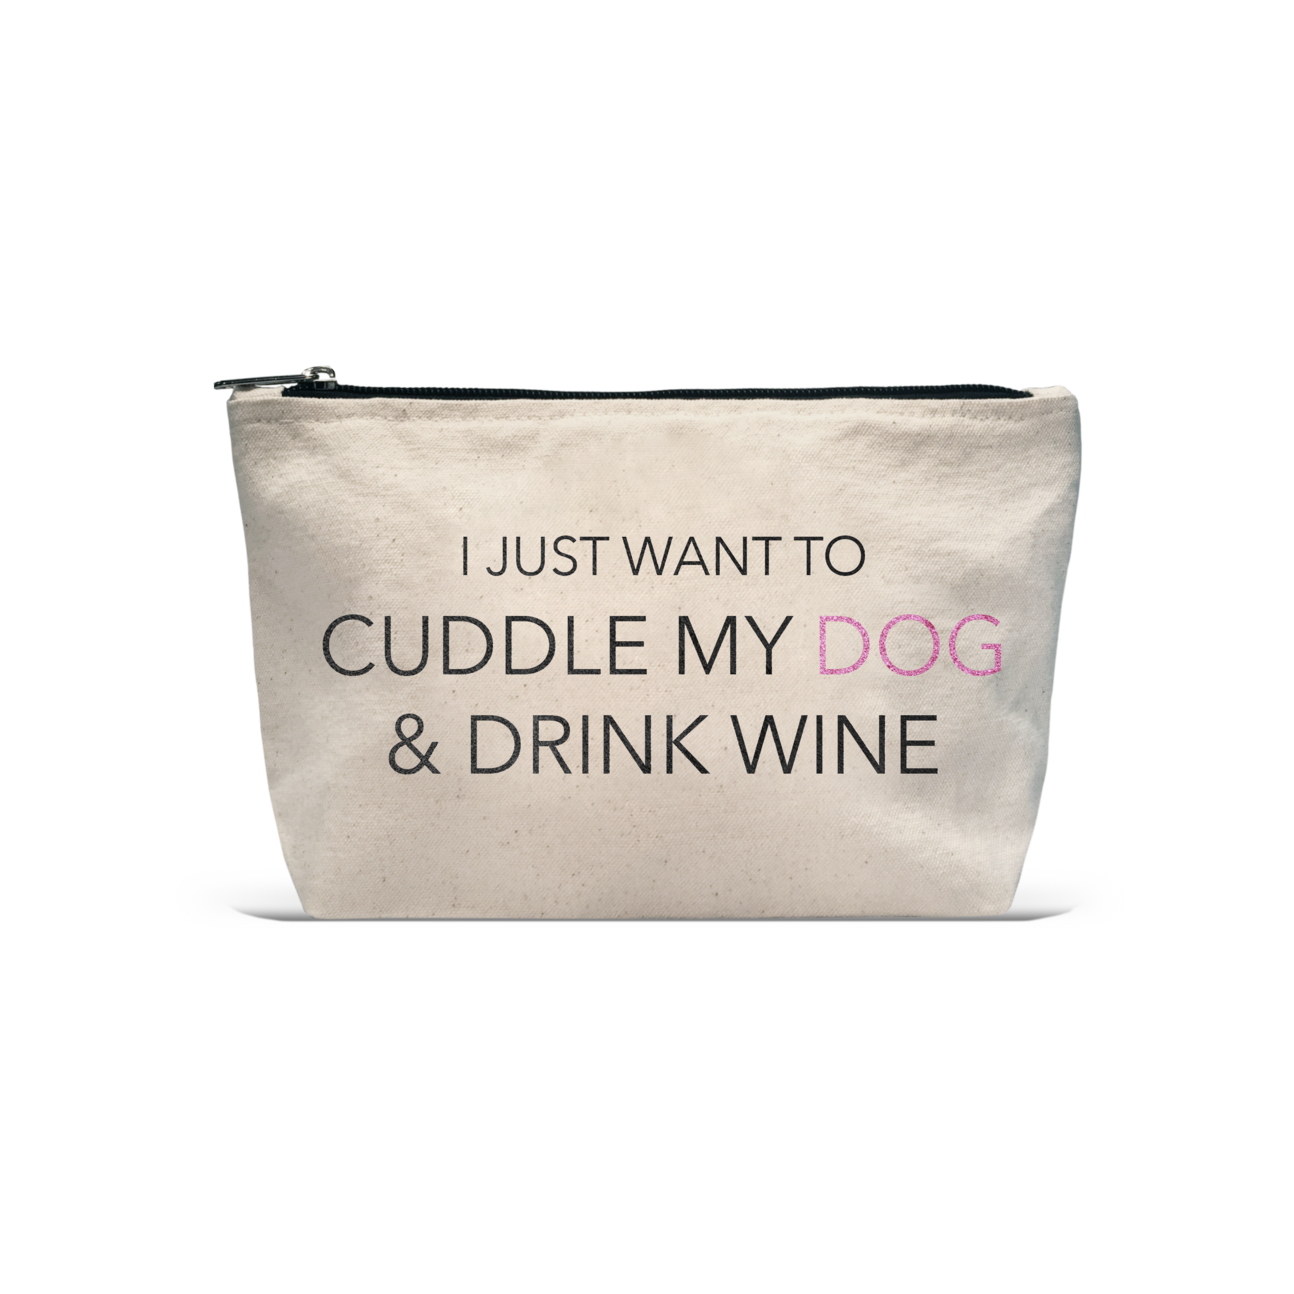 Pouch - I Just Want to Cuddle My Dog & Drink Wine bag